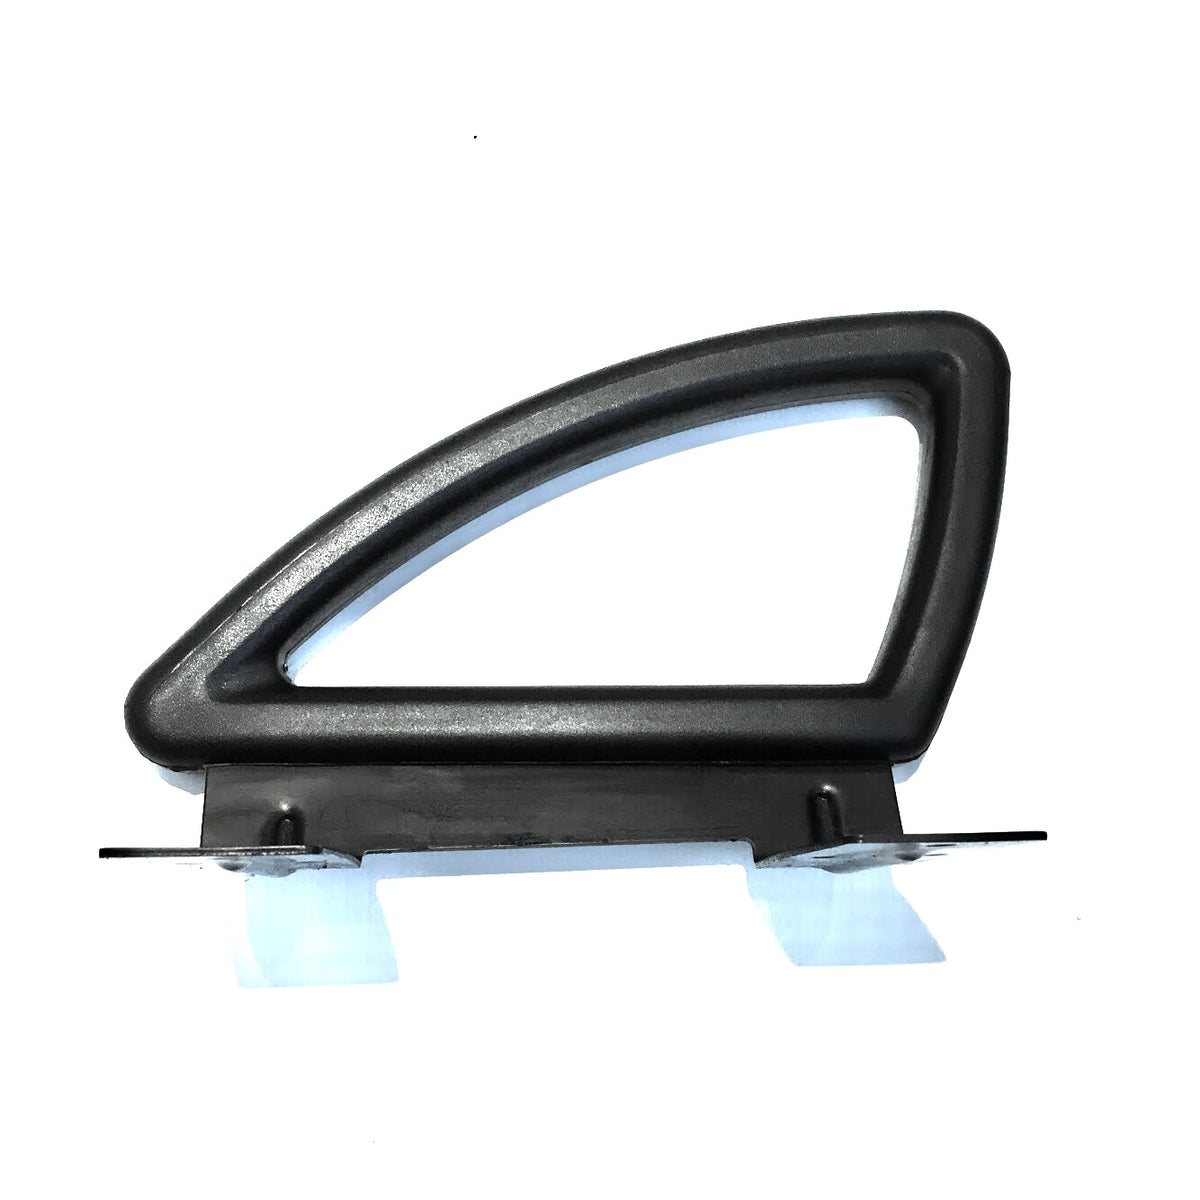 EMC ARM REST, RIGHT HAND SIDE FOR VANTAGE MODEL VEHICLES